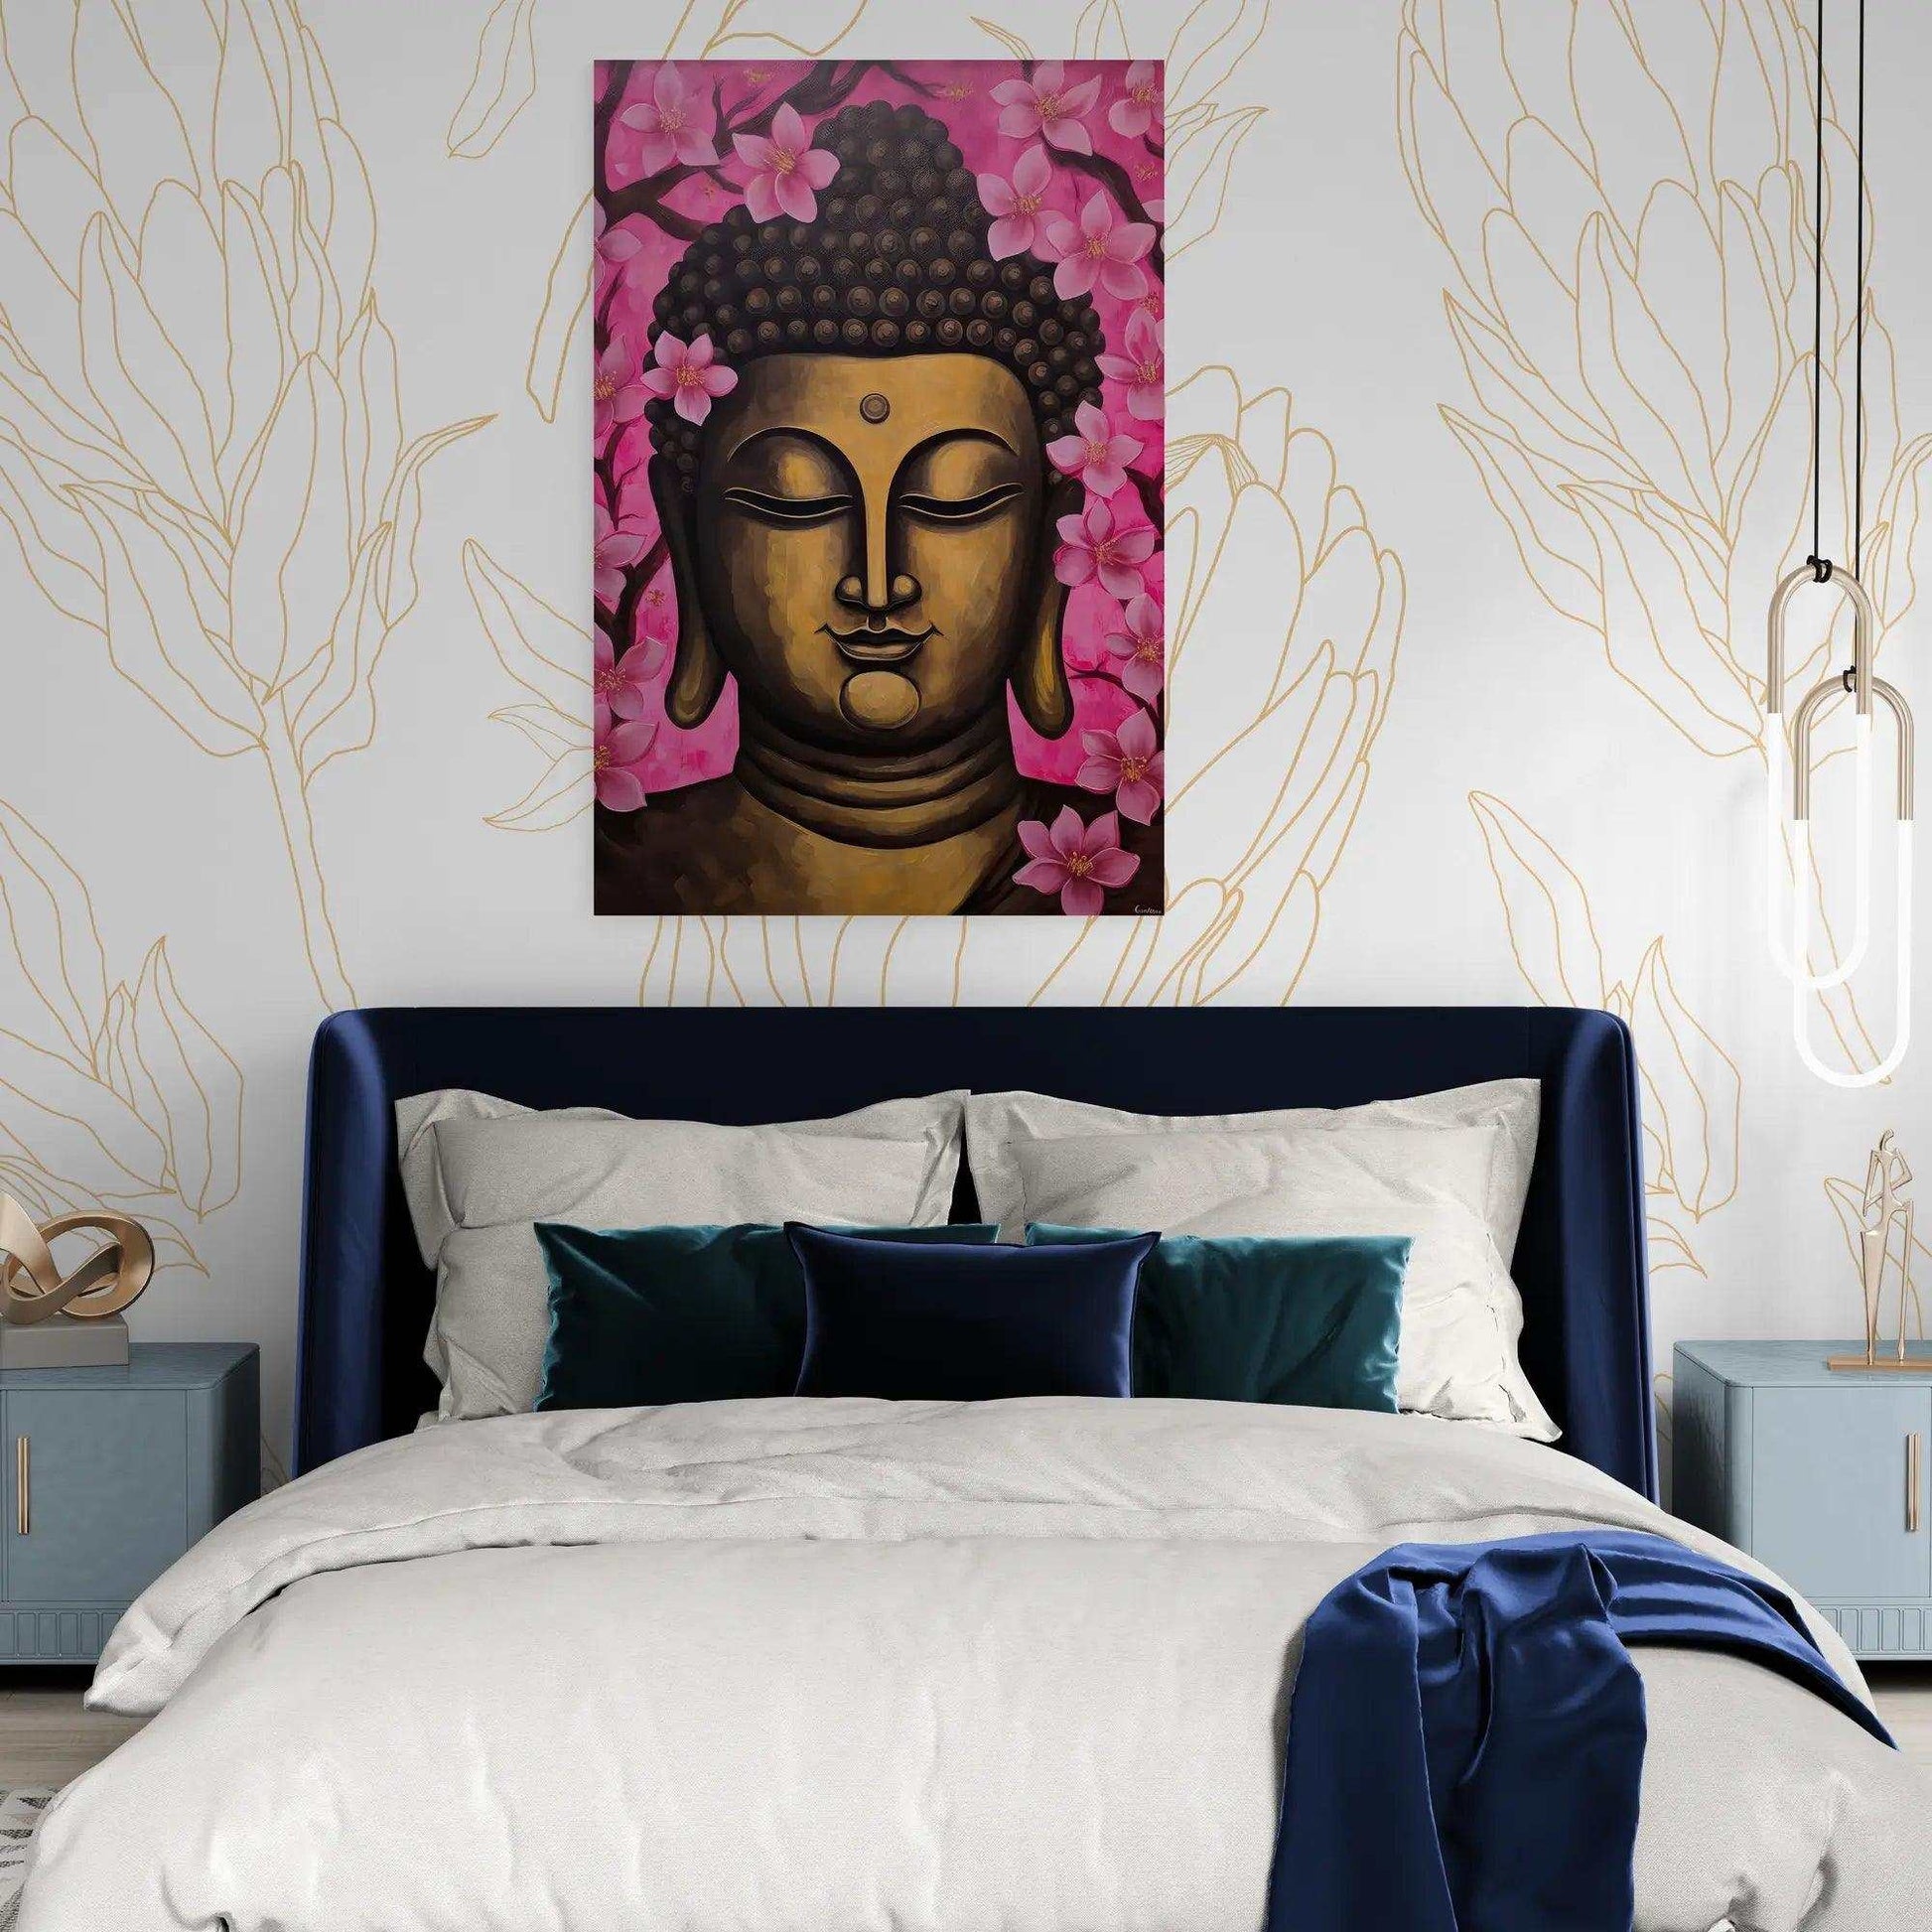 A serene Buddha painting with a gold and dark brown palette, adorned with pink cherry blossoms, hangs above a navy blue bed with plush bedding. The room's decor is complemented by an elegant, white line-drawn botanical wallpaper and a contemporary pendant light, creating a tranquil bedroom ambiance.